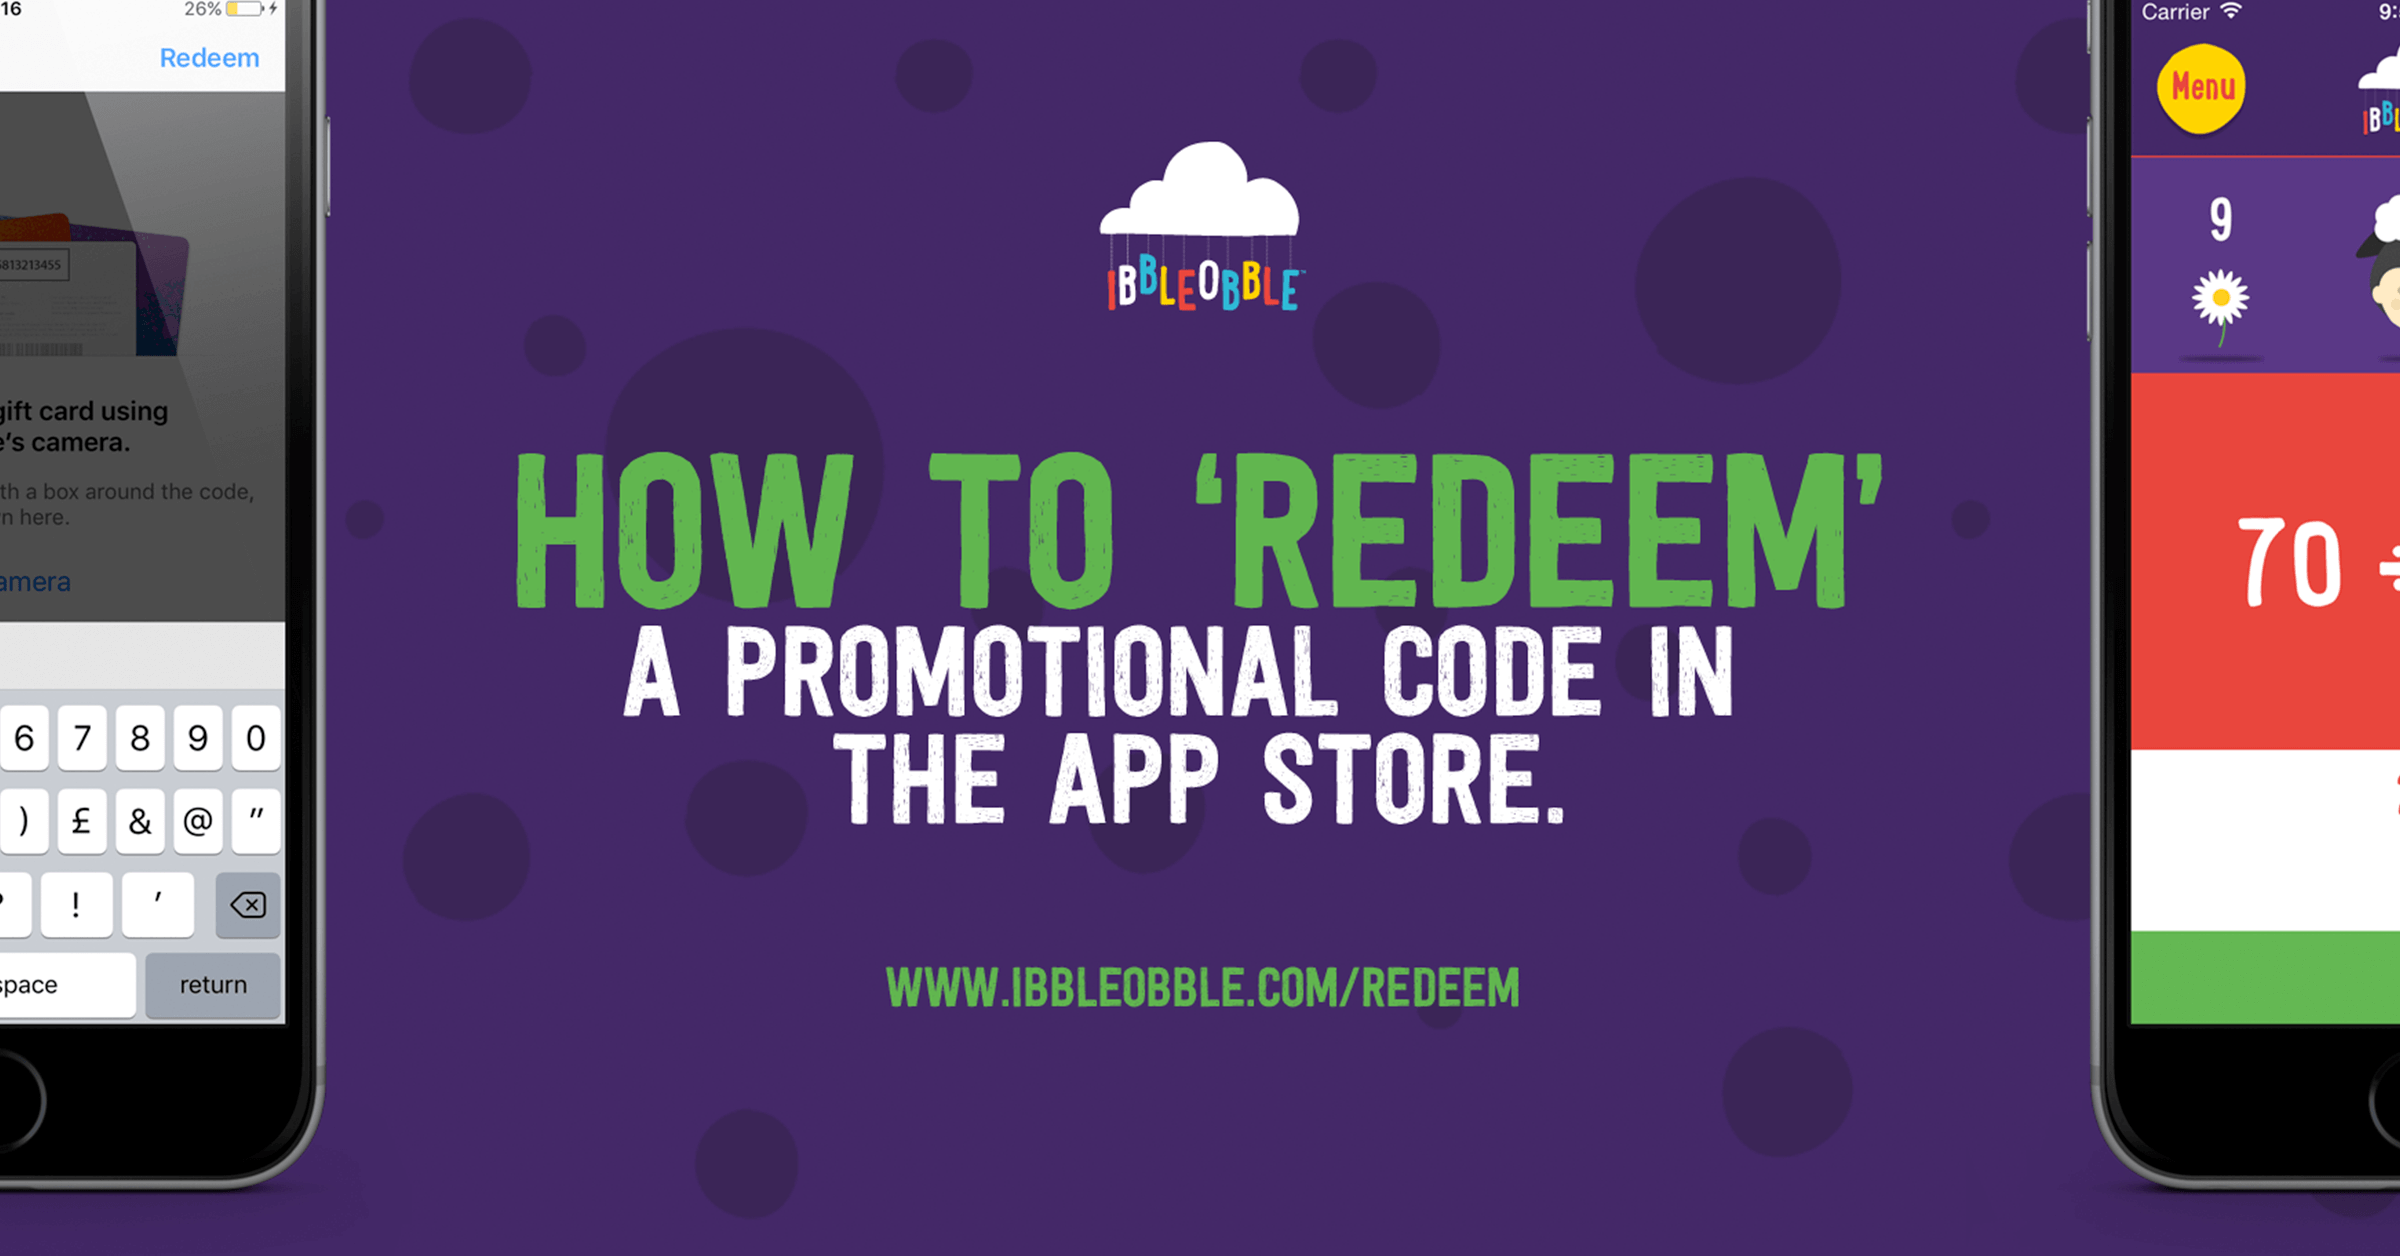 How to redeem an App Store promotional code